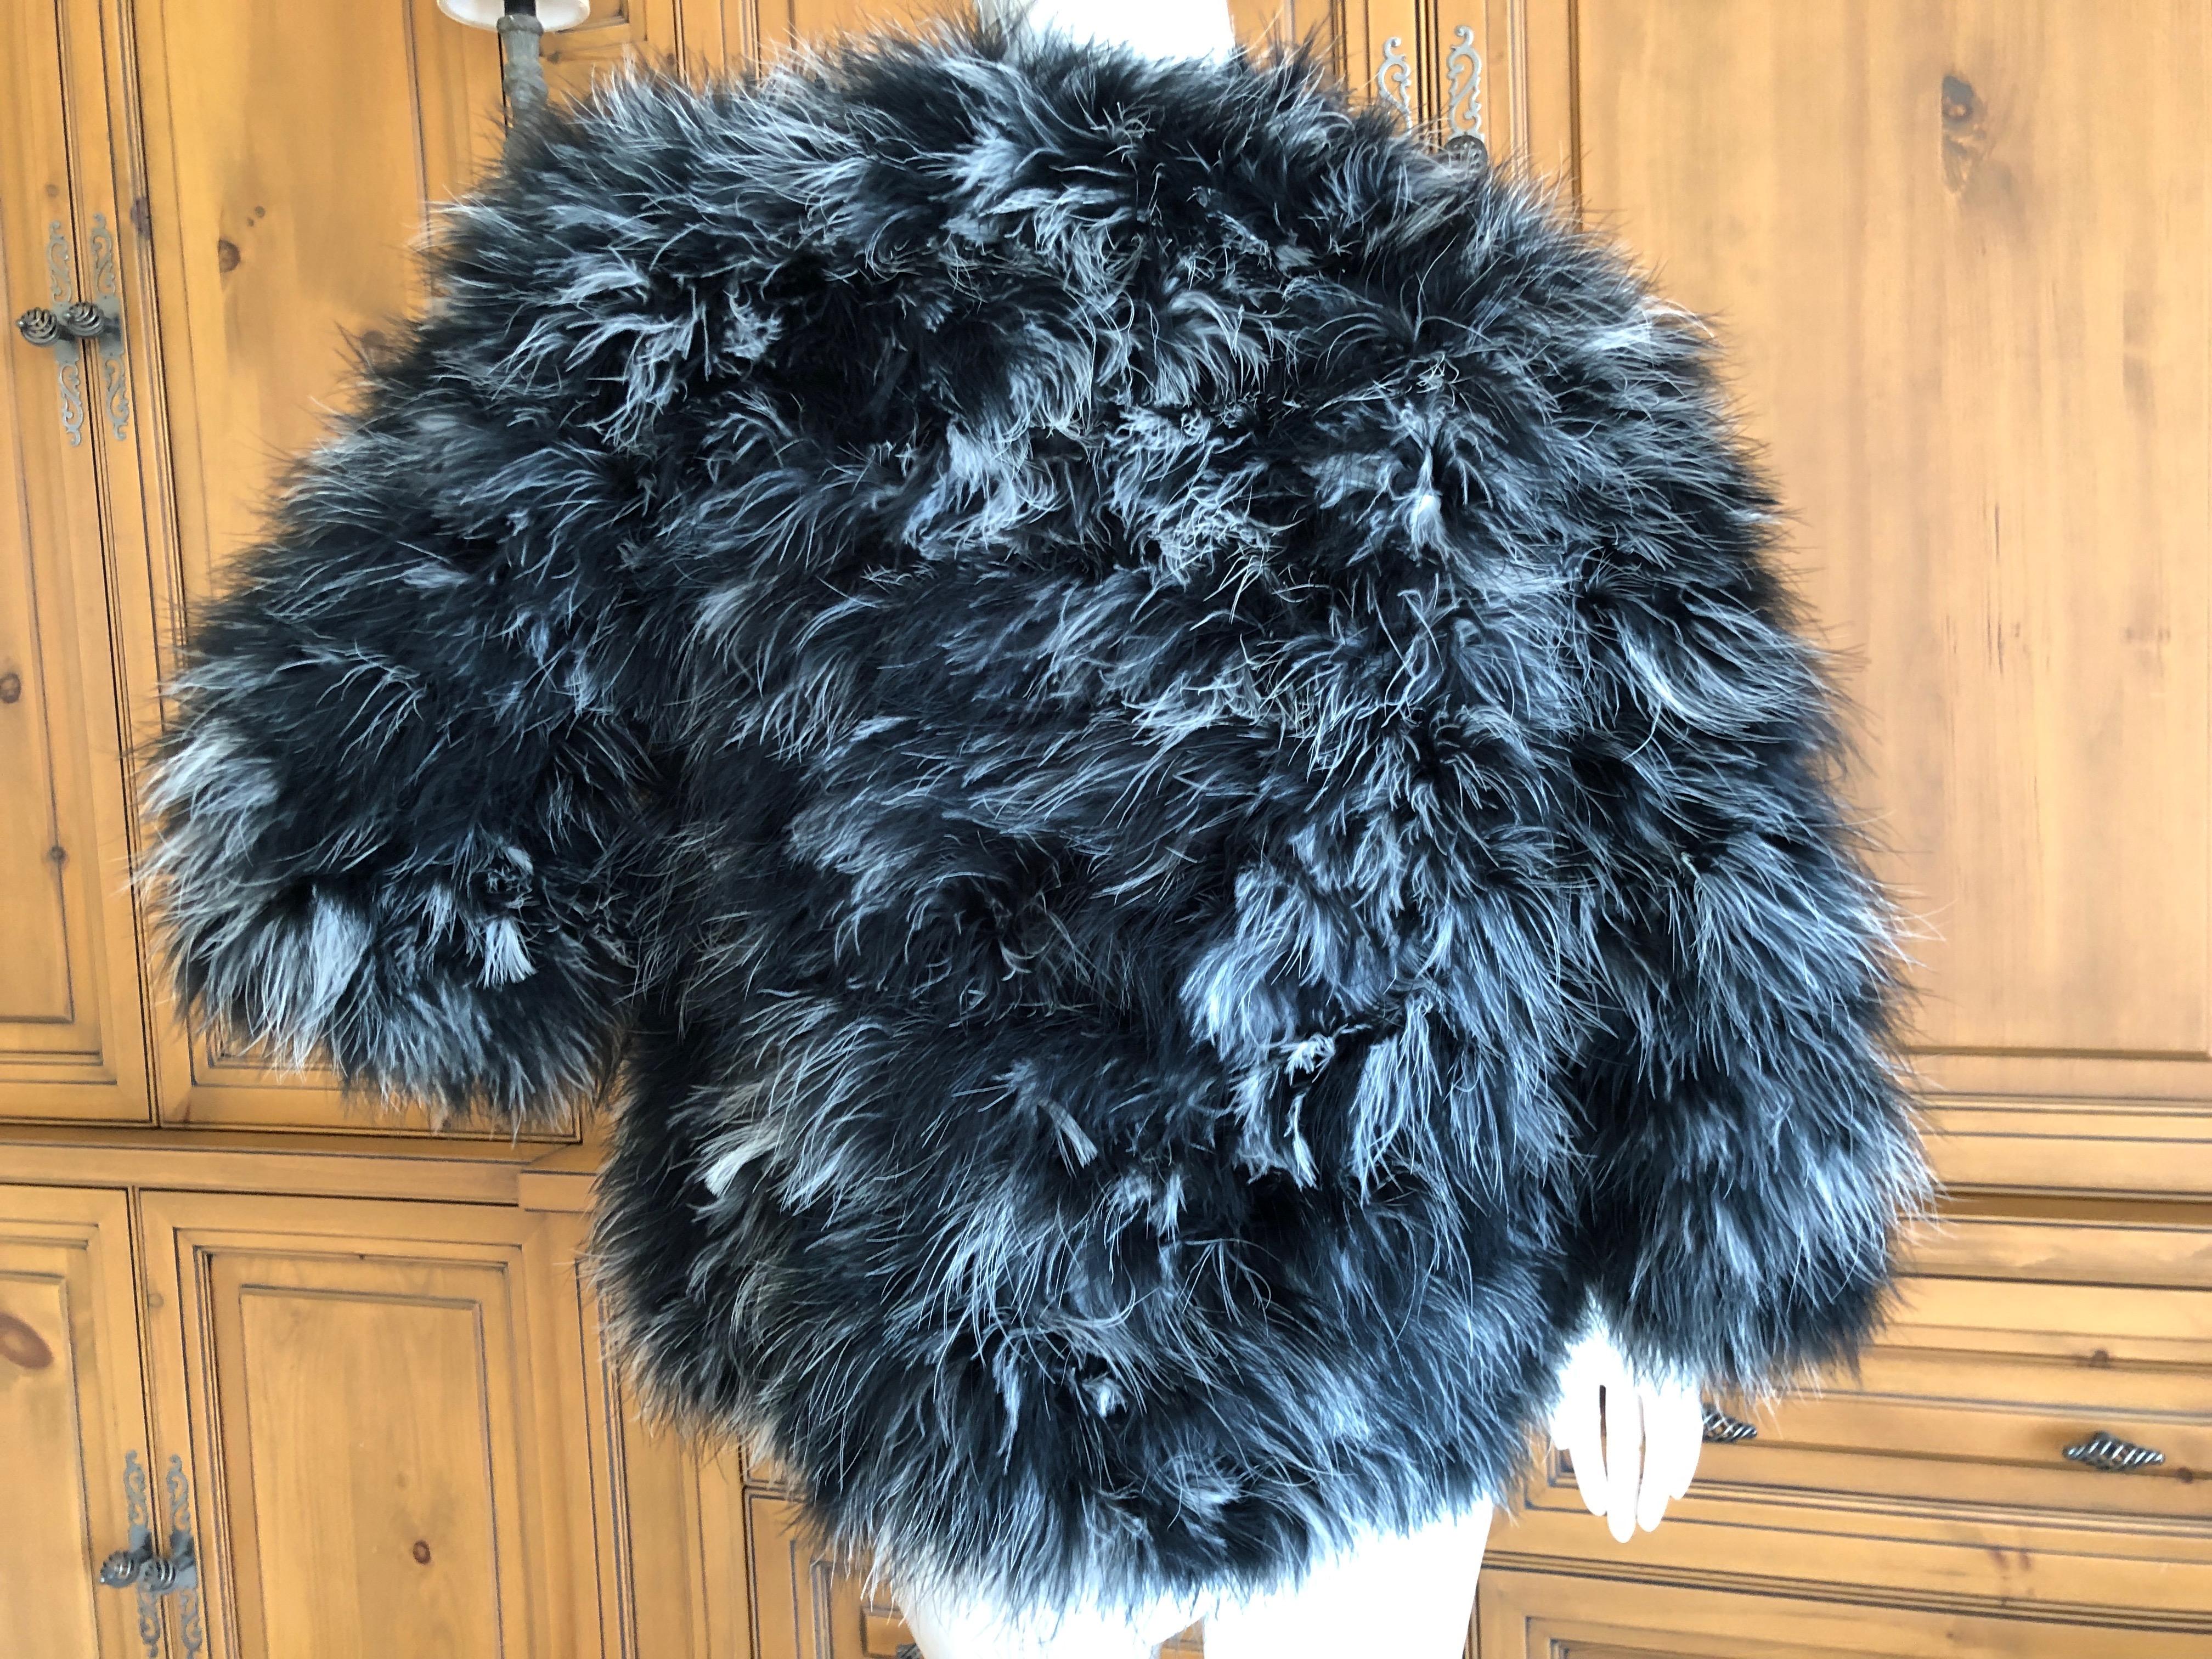 Yves Saint Laurent Rive Gauche 1970's Maribou Ostrich Feather Chubby Jacket For Sale 3